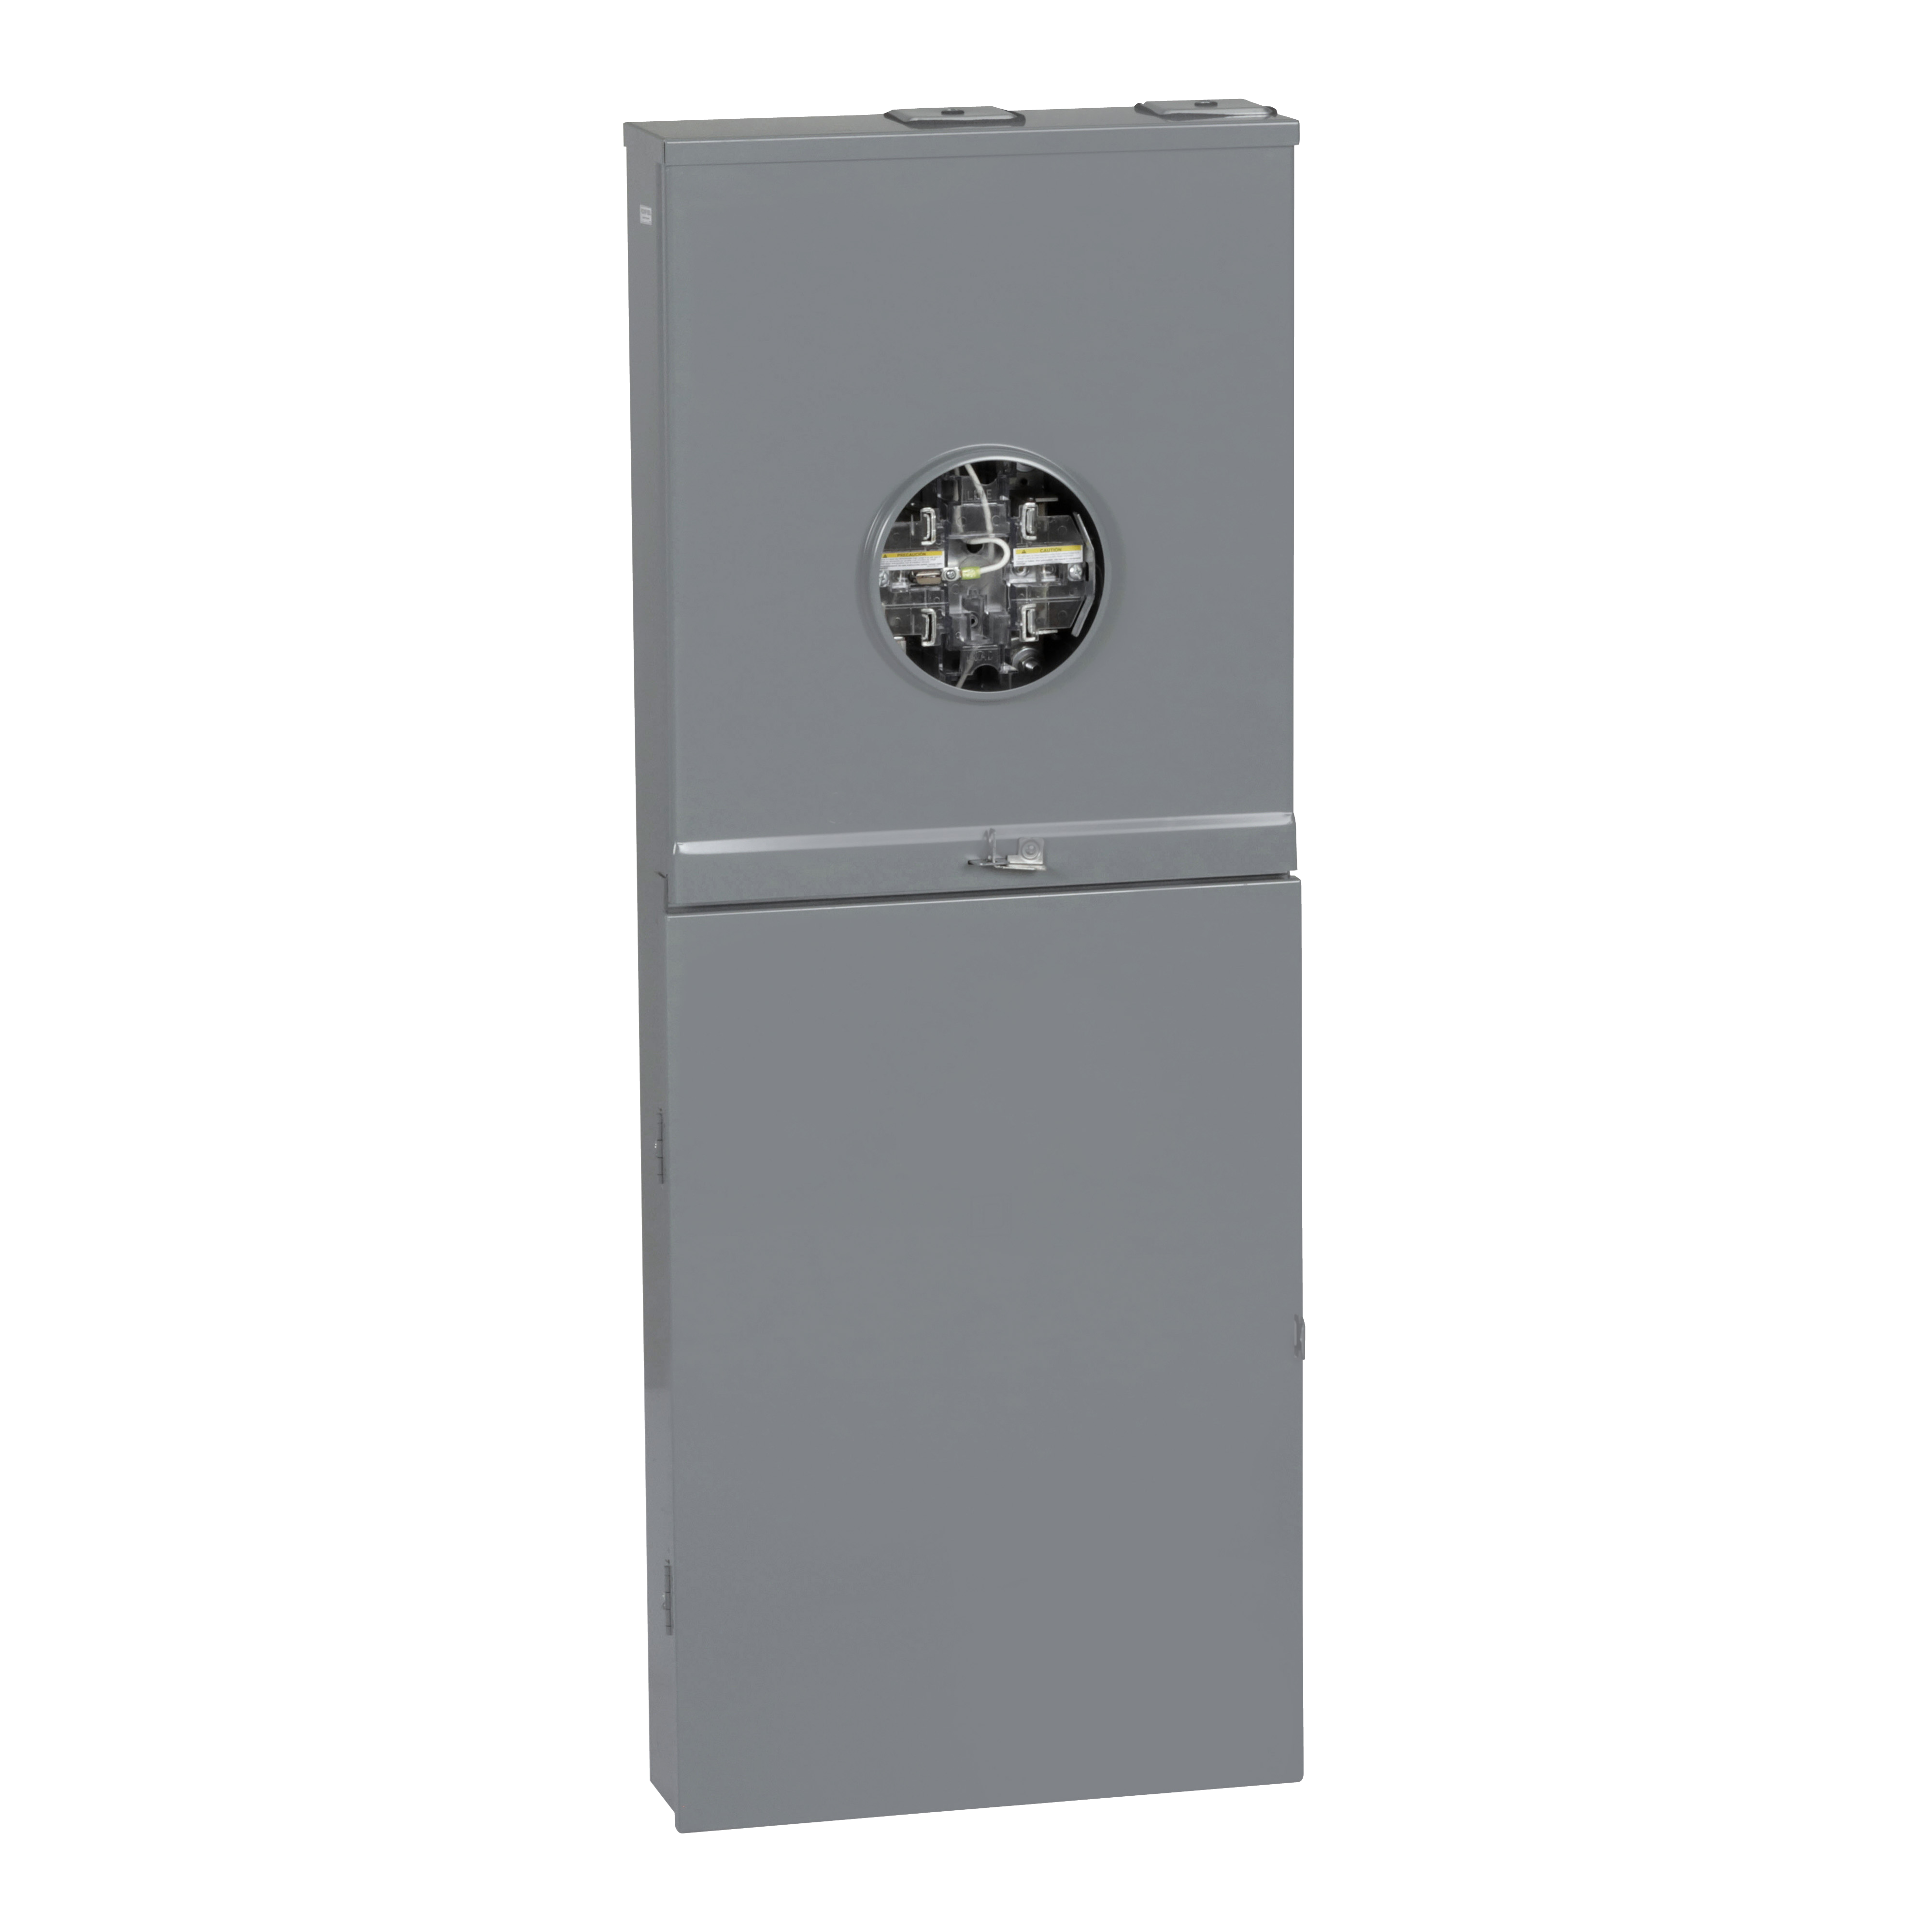 Meter mains, Homeline, CSED, ringless socket, 150A, outdoor surface mount, maximum 8 spaces, 16 circuits, lever bypass